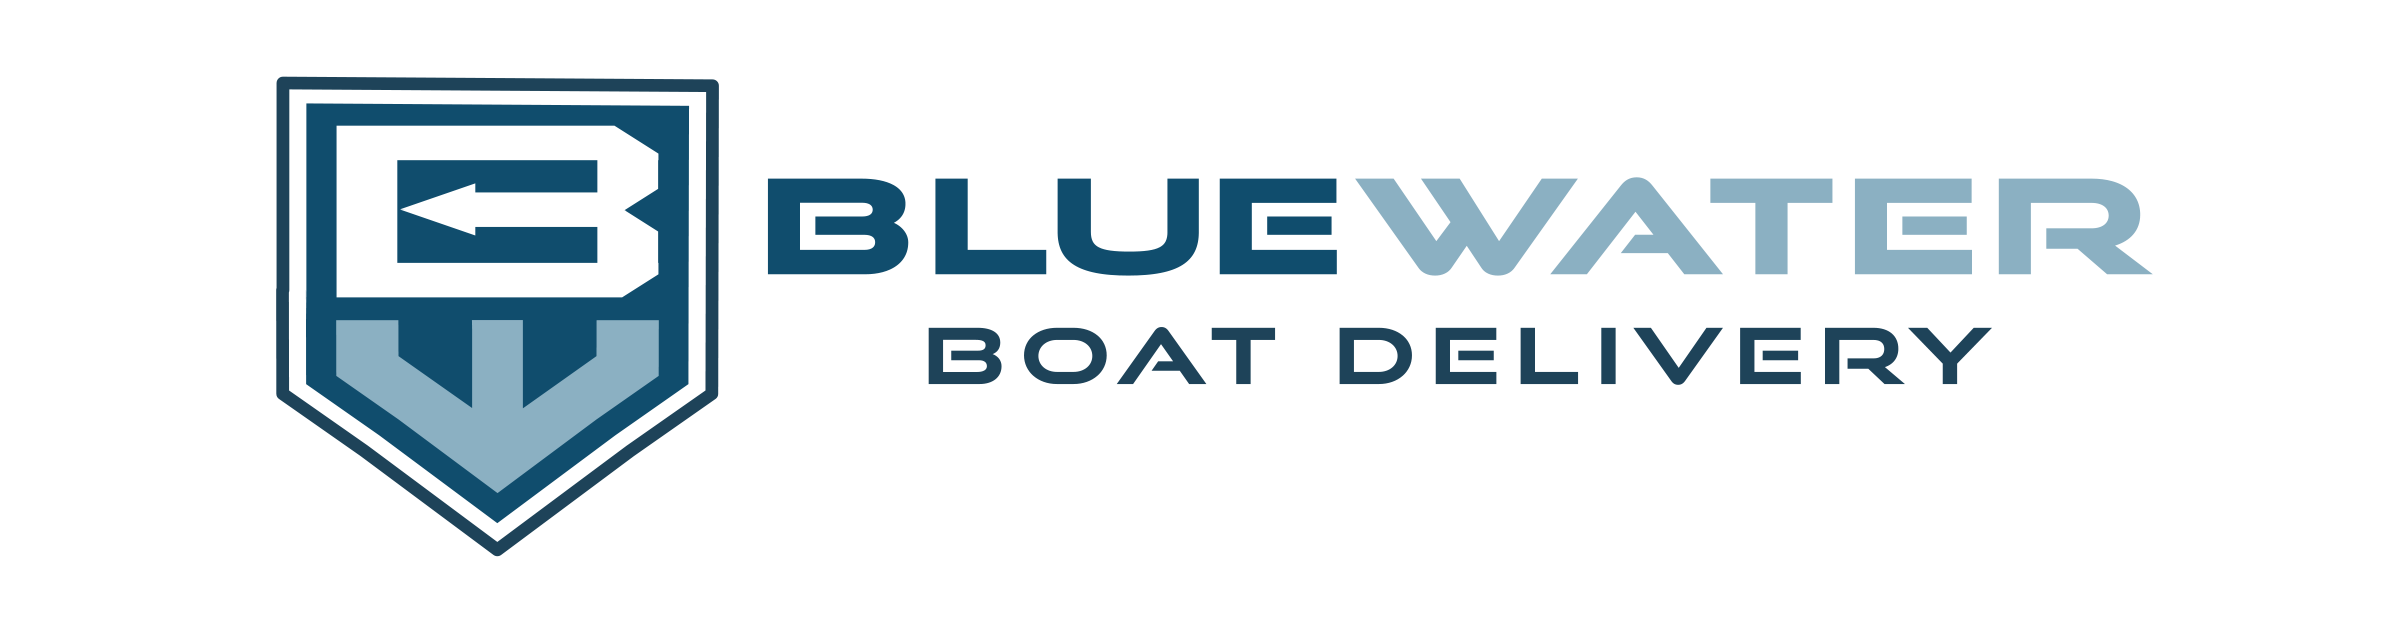 Blue Water Boat Delivery